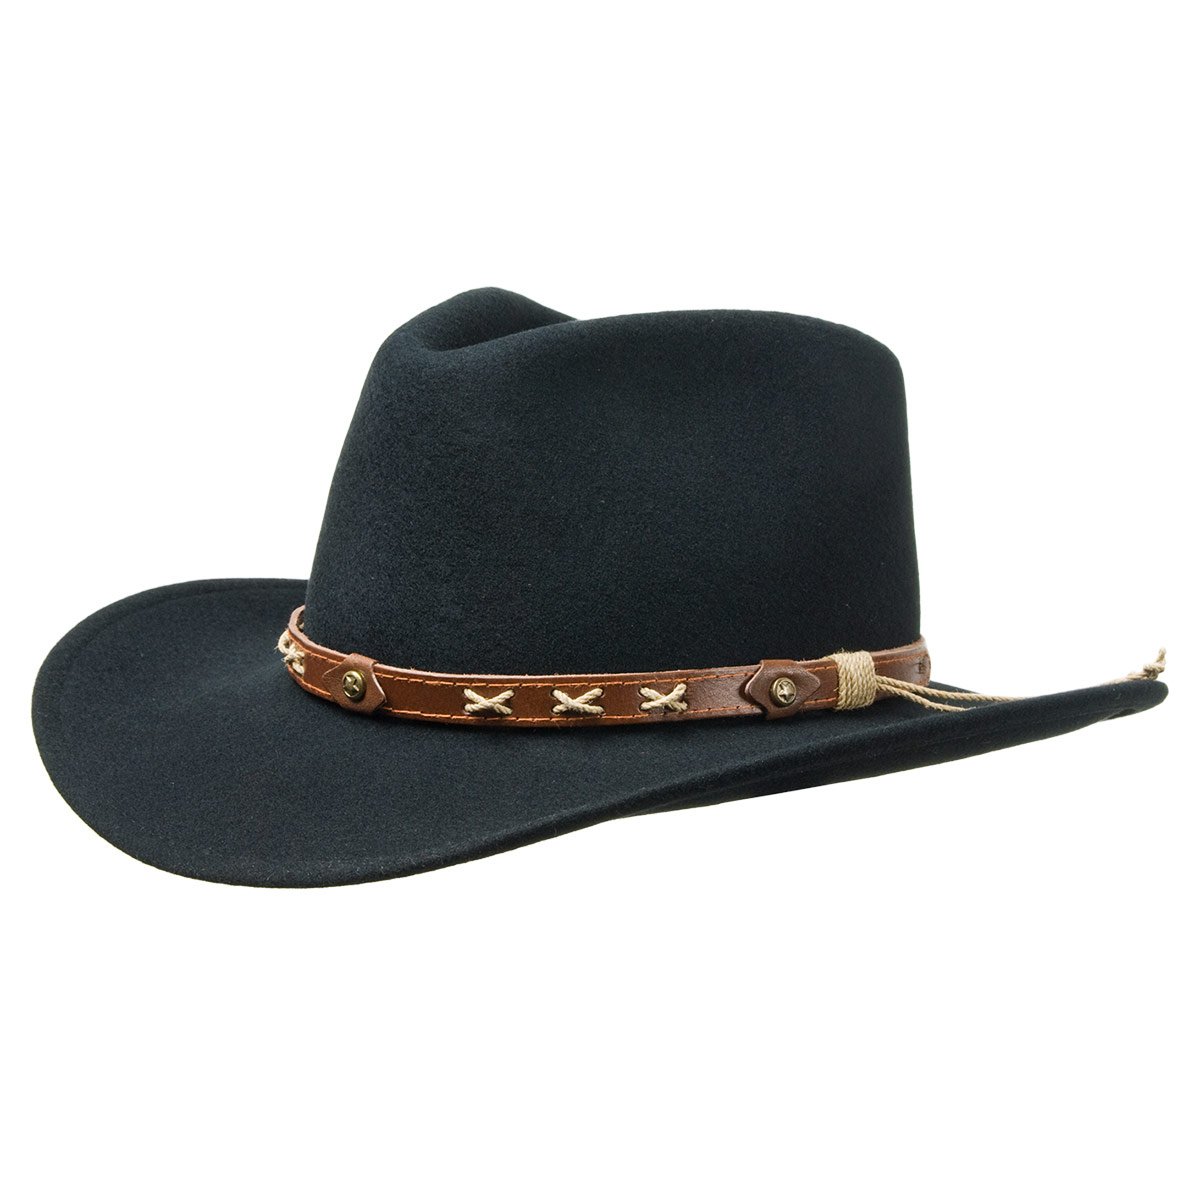 hat-in-cowboy-style